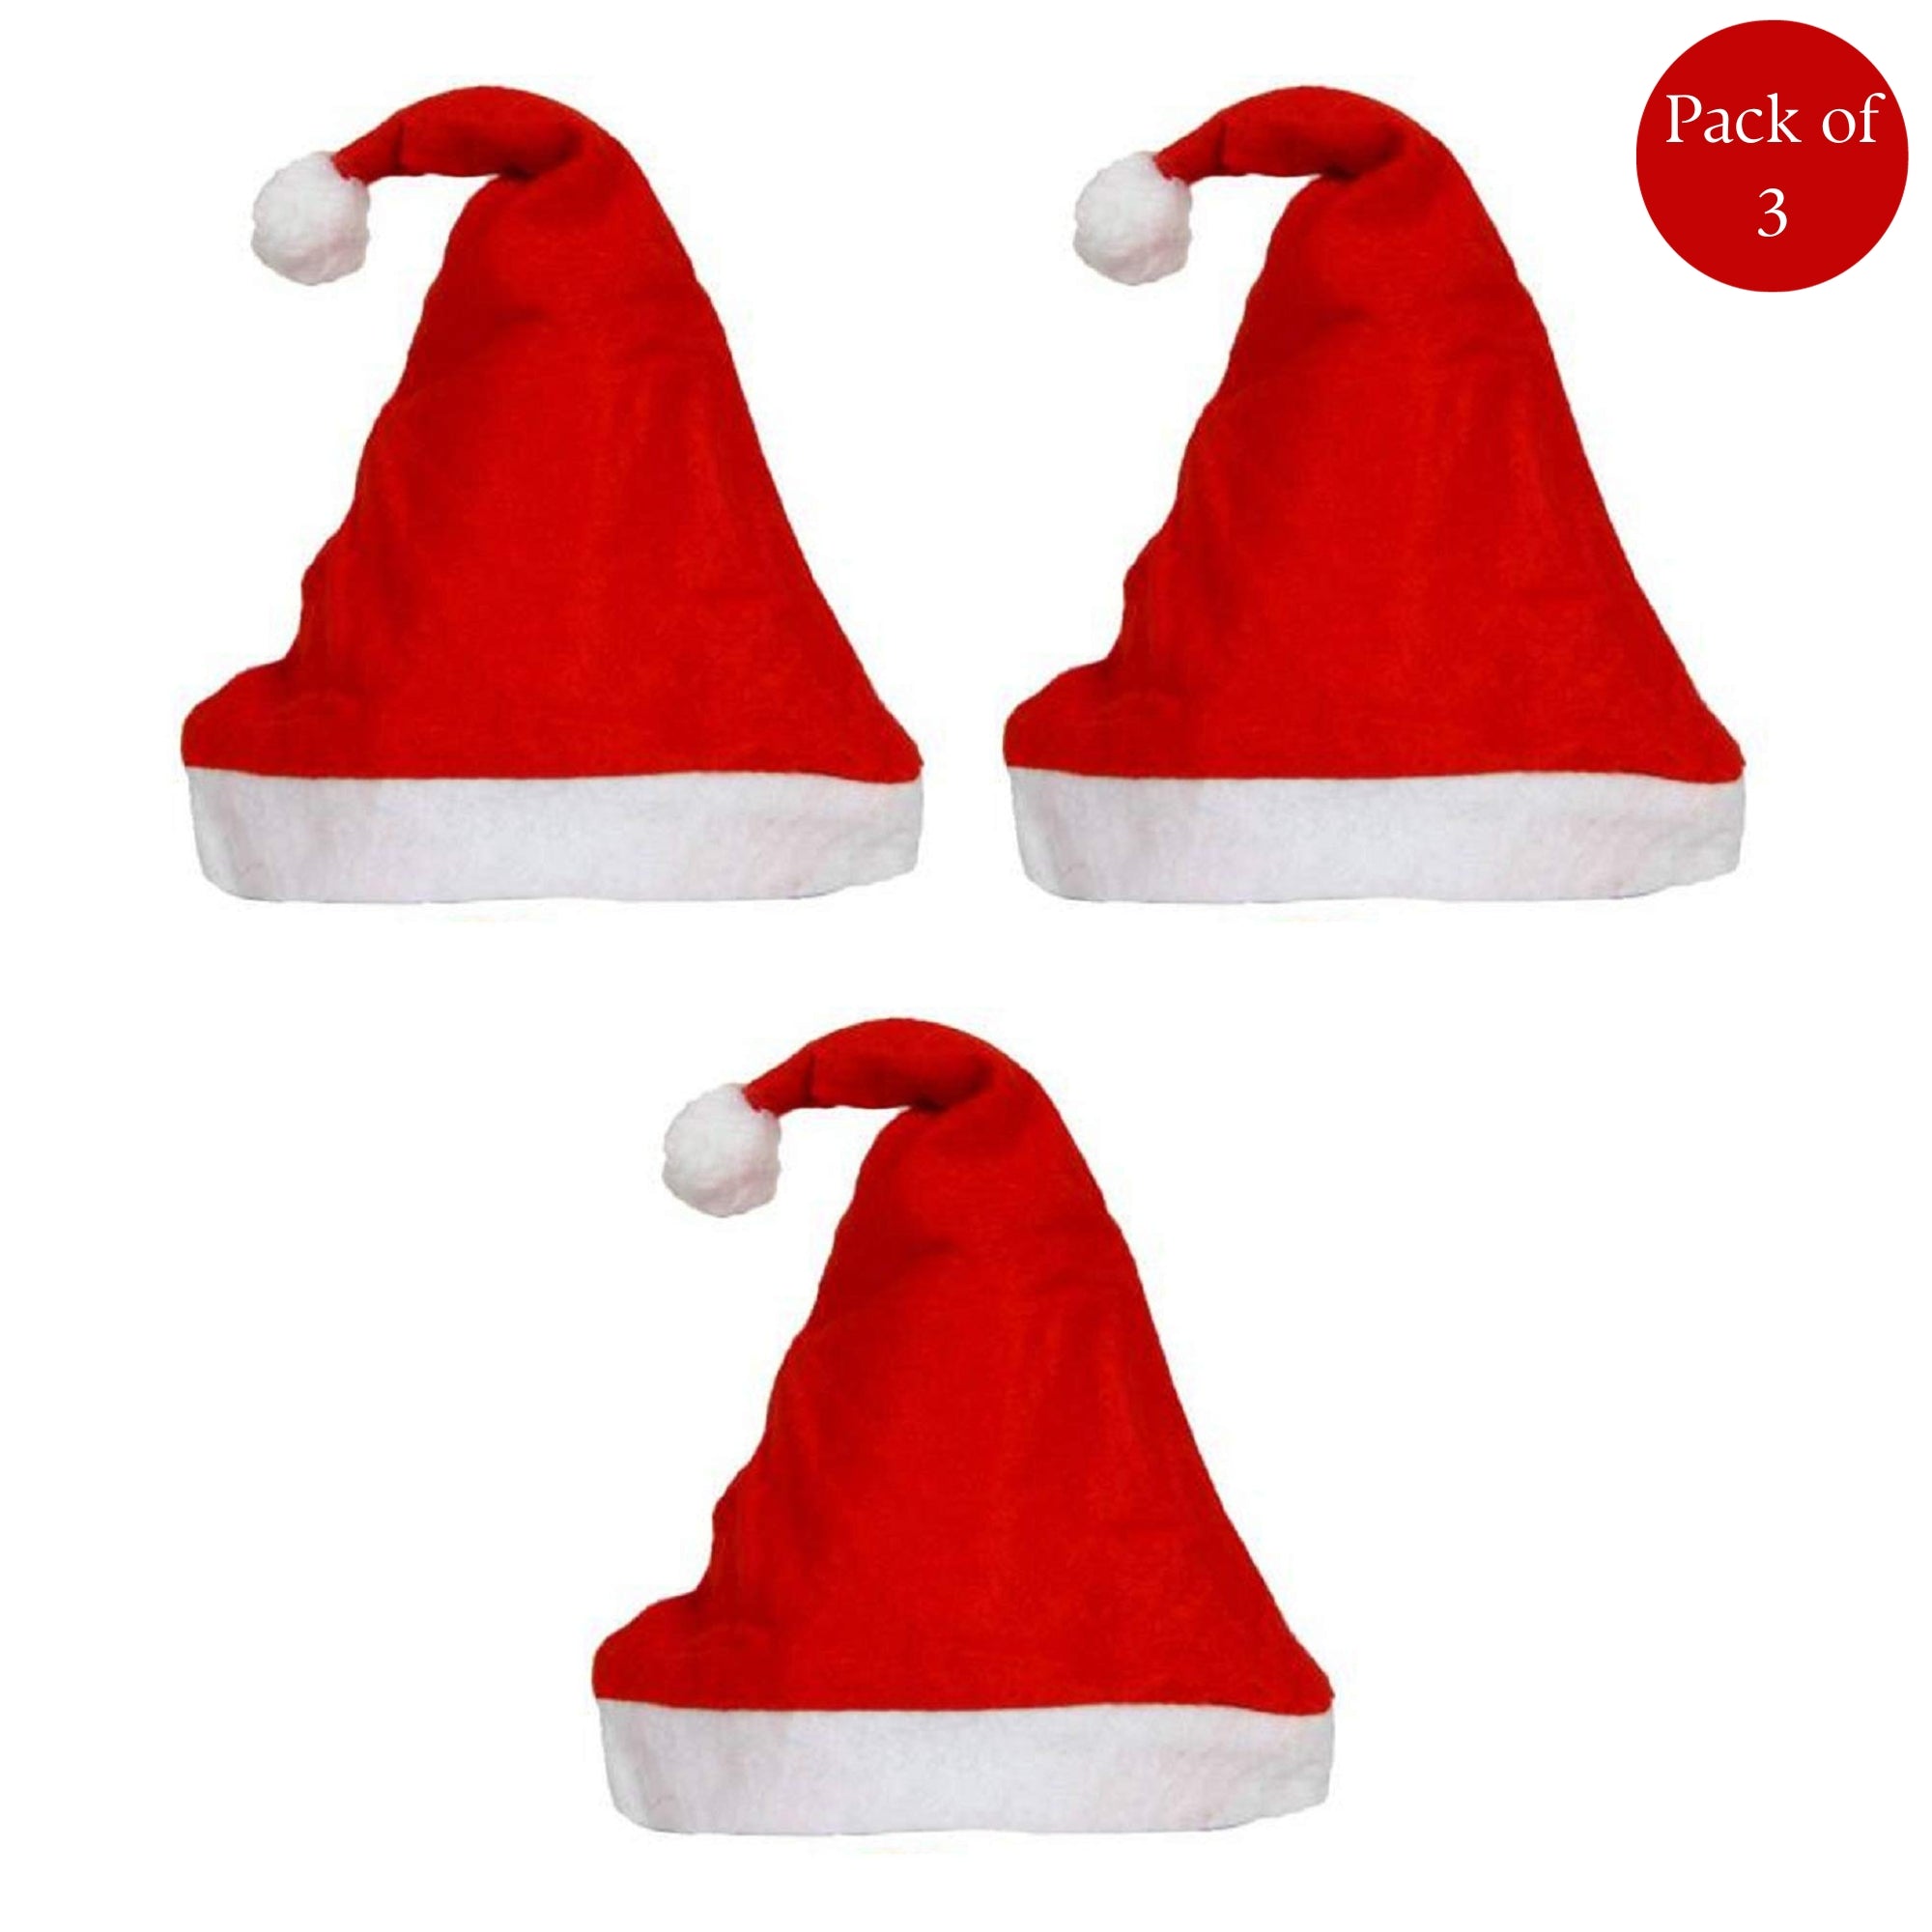 eCraftIndia Red and White Merry Christmas Hats, Santa Claus Caps for kids and Adults - Free Size XMAS Caps, Santa Claus Hats for Christmas, New Year, Festive Holiday Party (Set of 3) 1